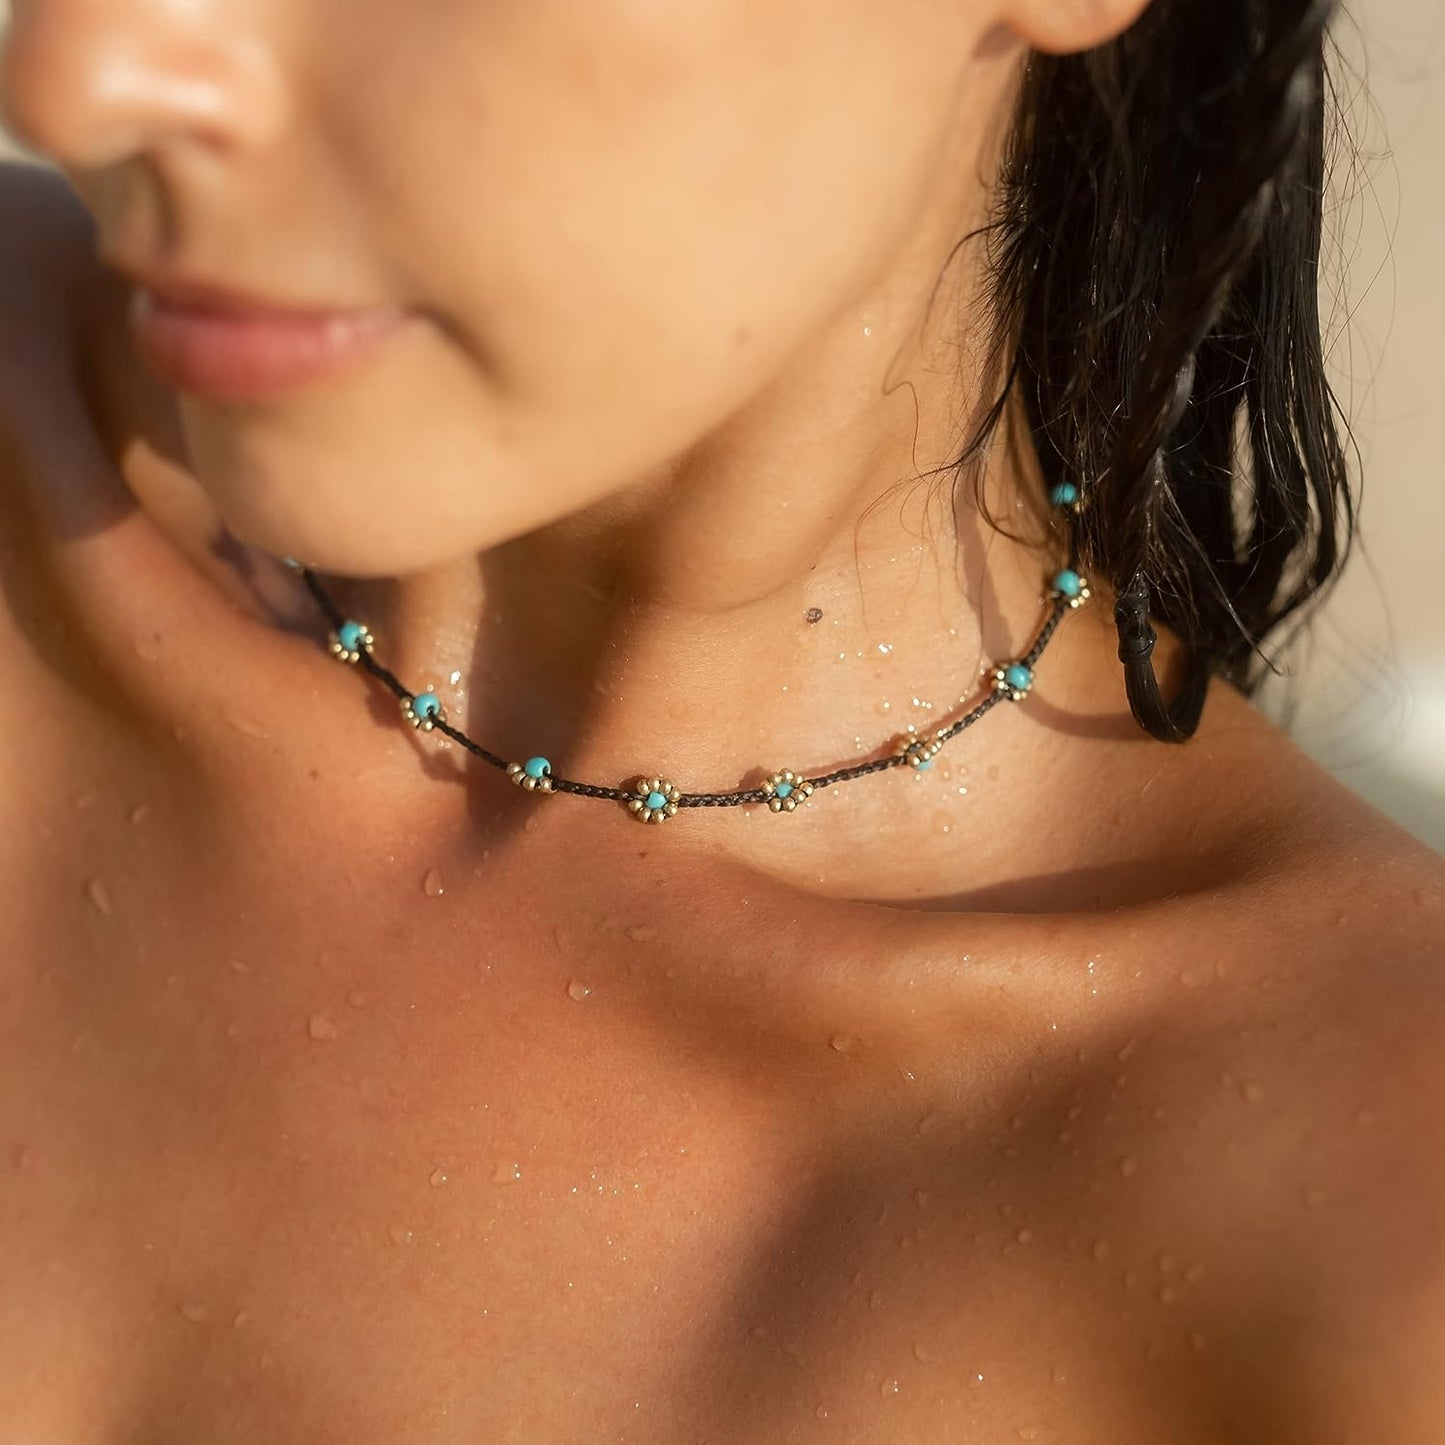 Surfer Necklace with Beads • Boho Choker Necklace Chain • Women & Girls • Handmade Beach Summer Jewelry • Goa Hippie Oriental Necklace • Adjustable & Waterproof (Turquoise Beads)